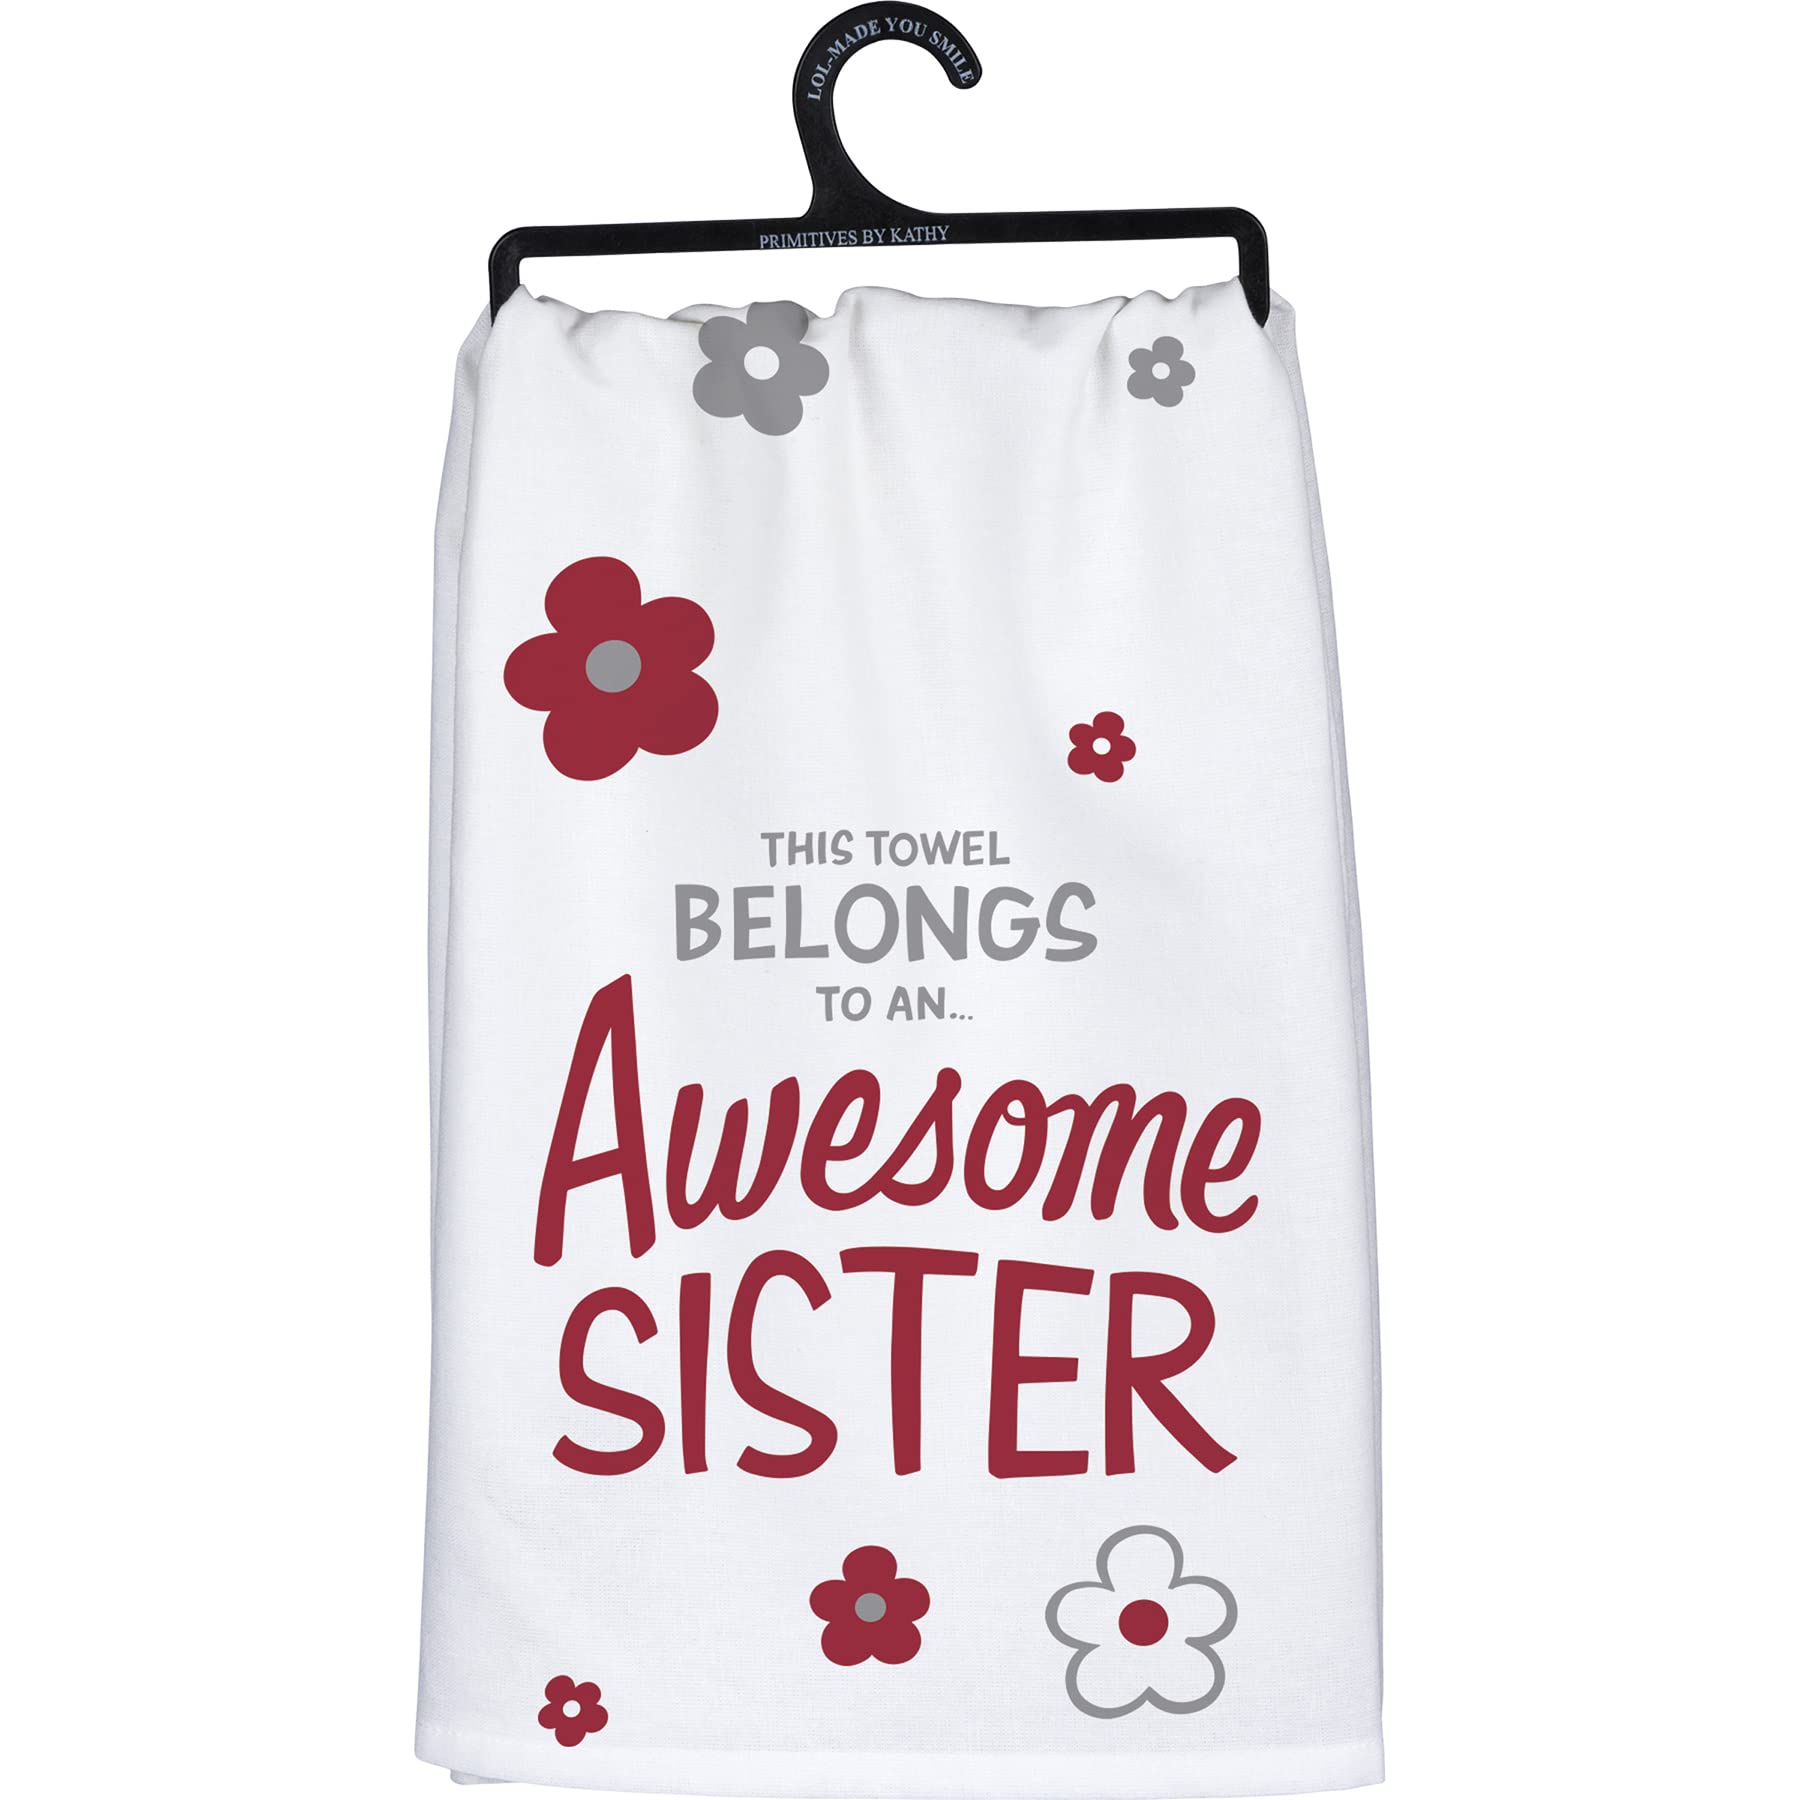 Primitives by Kathy This Towel Belongs to an ... Awesome Sister Decorative Kitchen Towel, Small